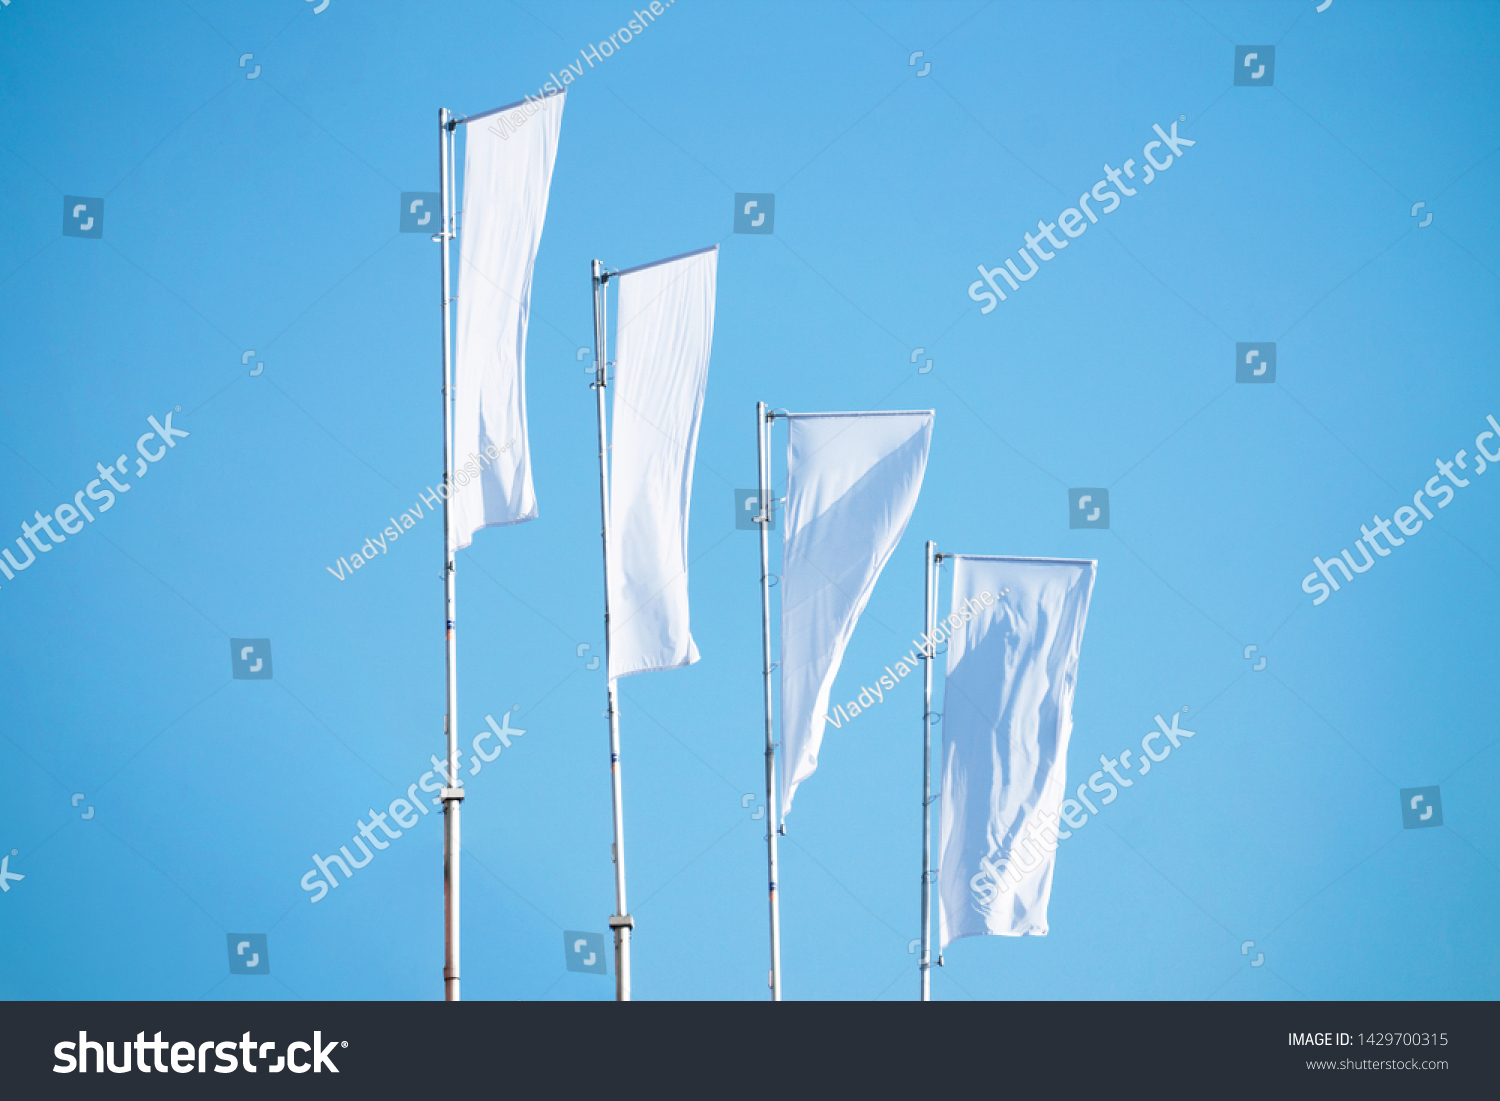 Three blank white flags on flagpoles against cloudy blue sky with perspective, corporate flag mockup to ad logo, text or symbol, company identity flag template with copy space #1429700315